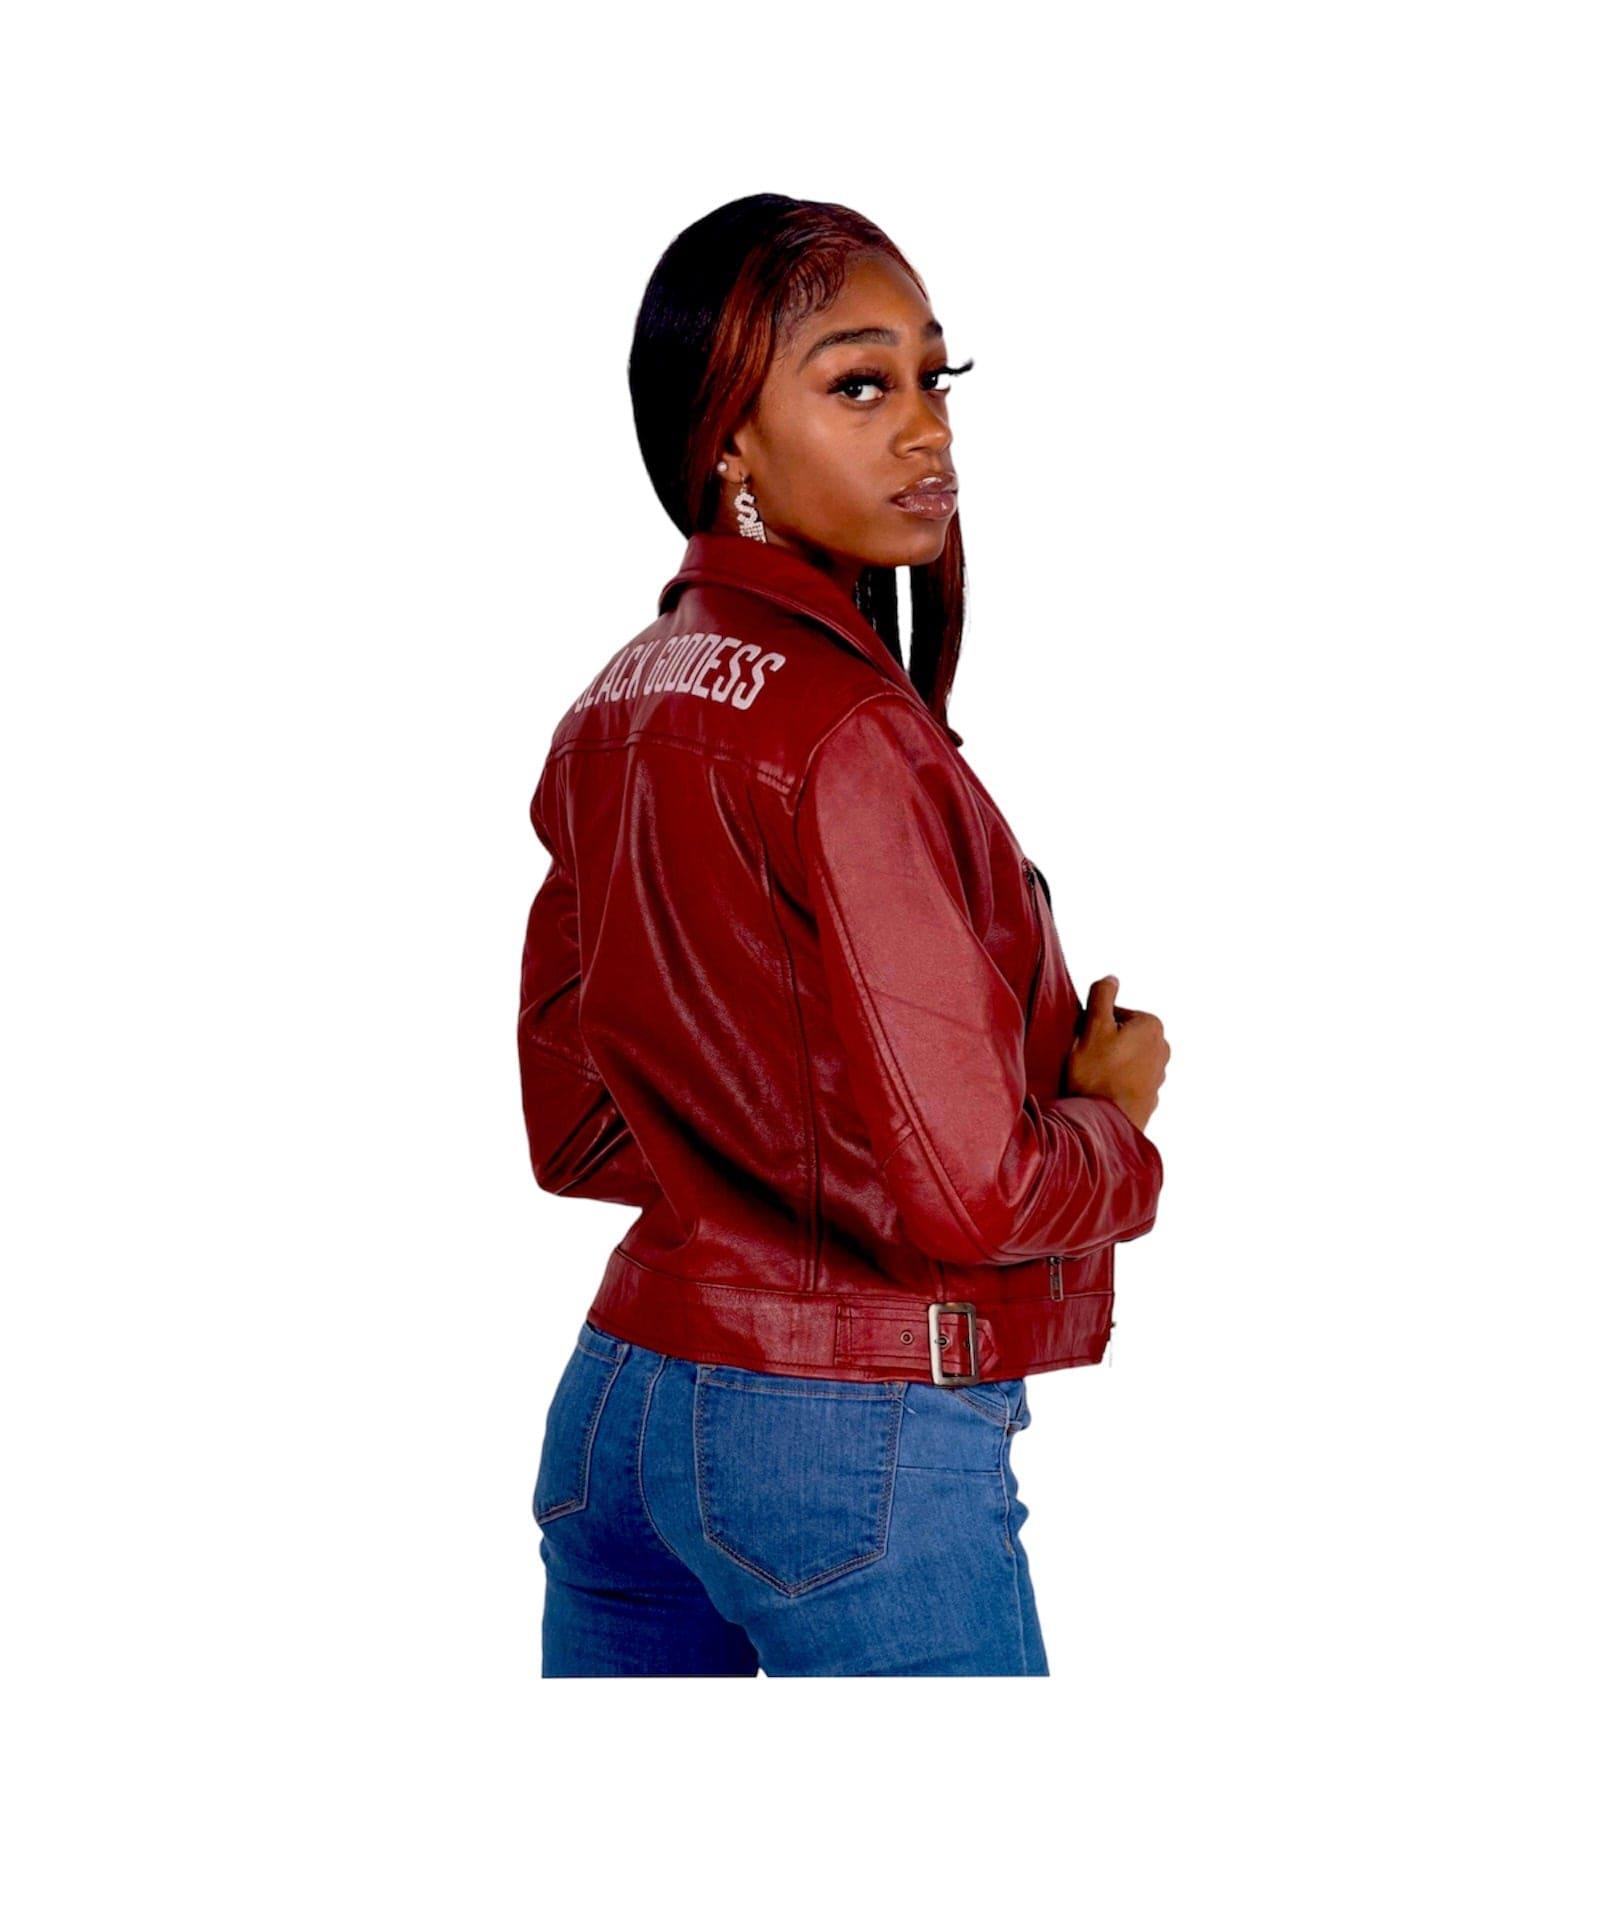 How to Style Red Leather Jackets?